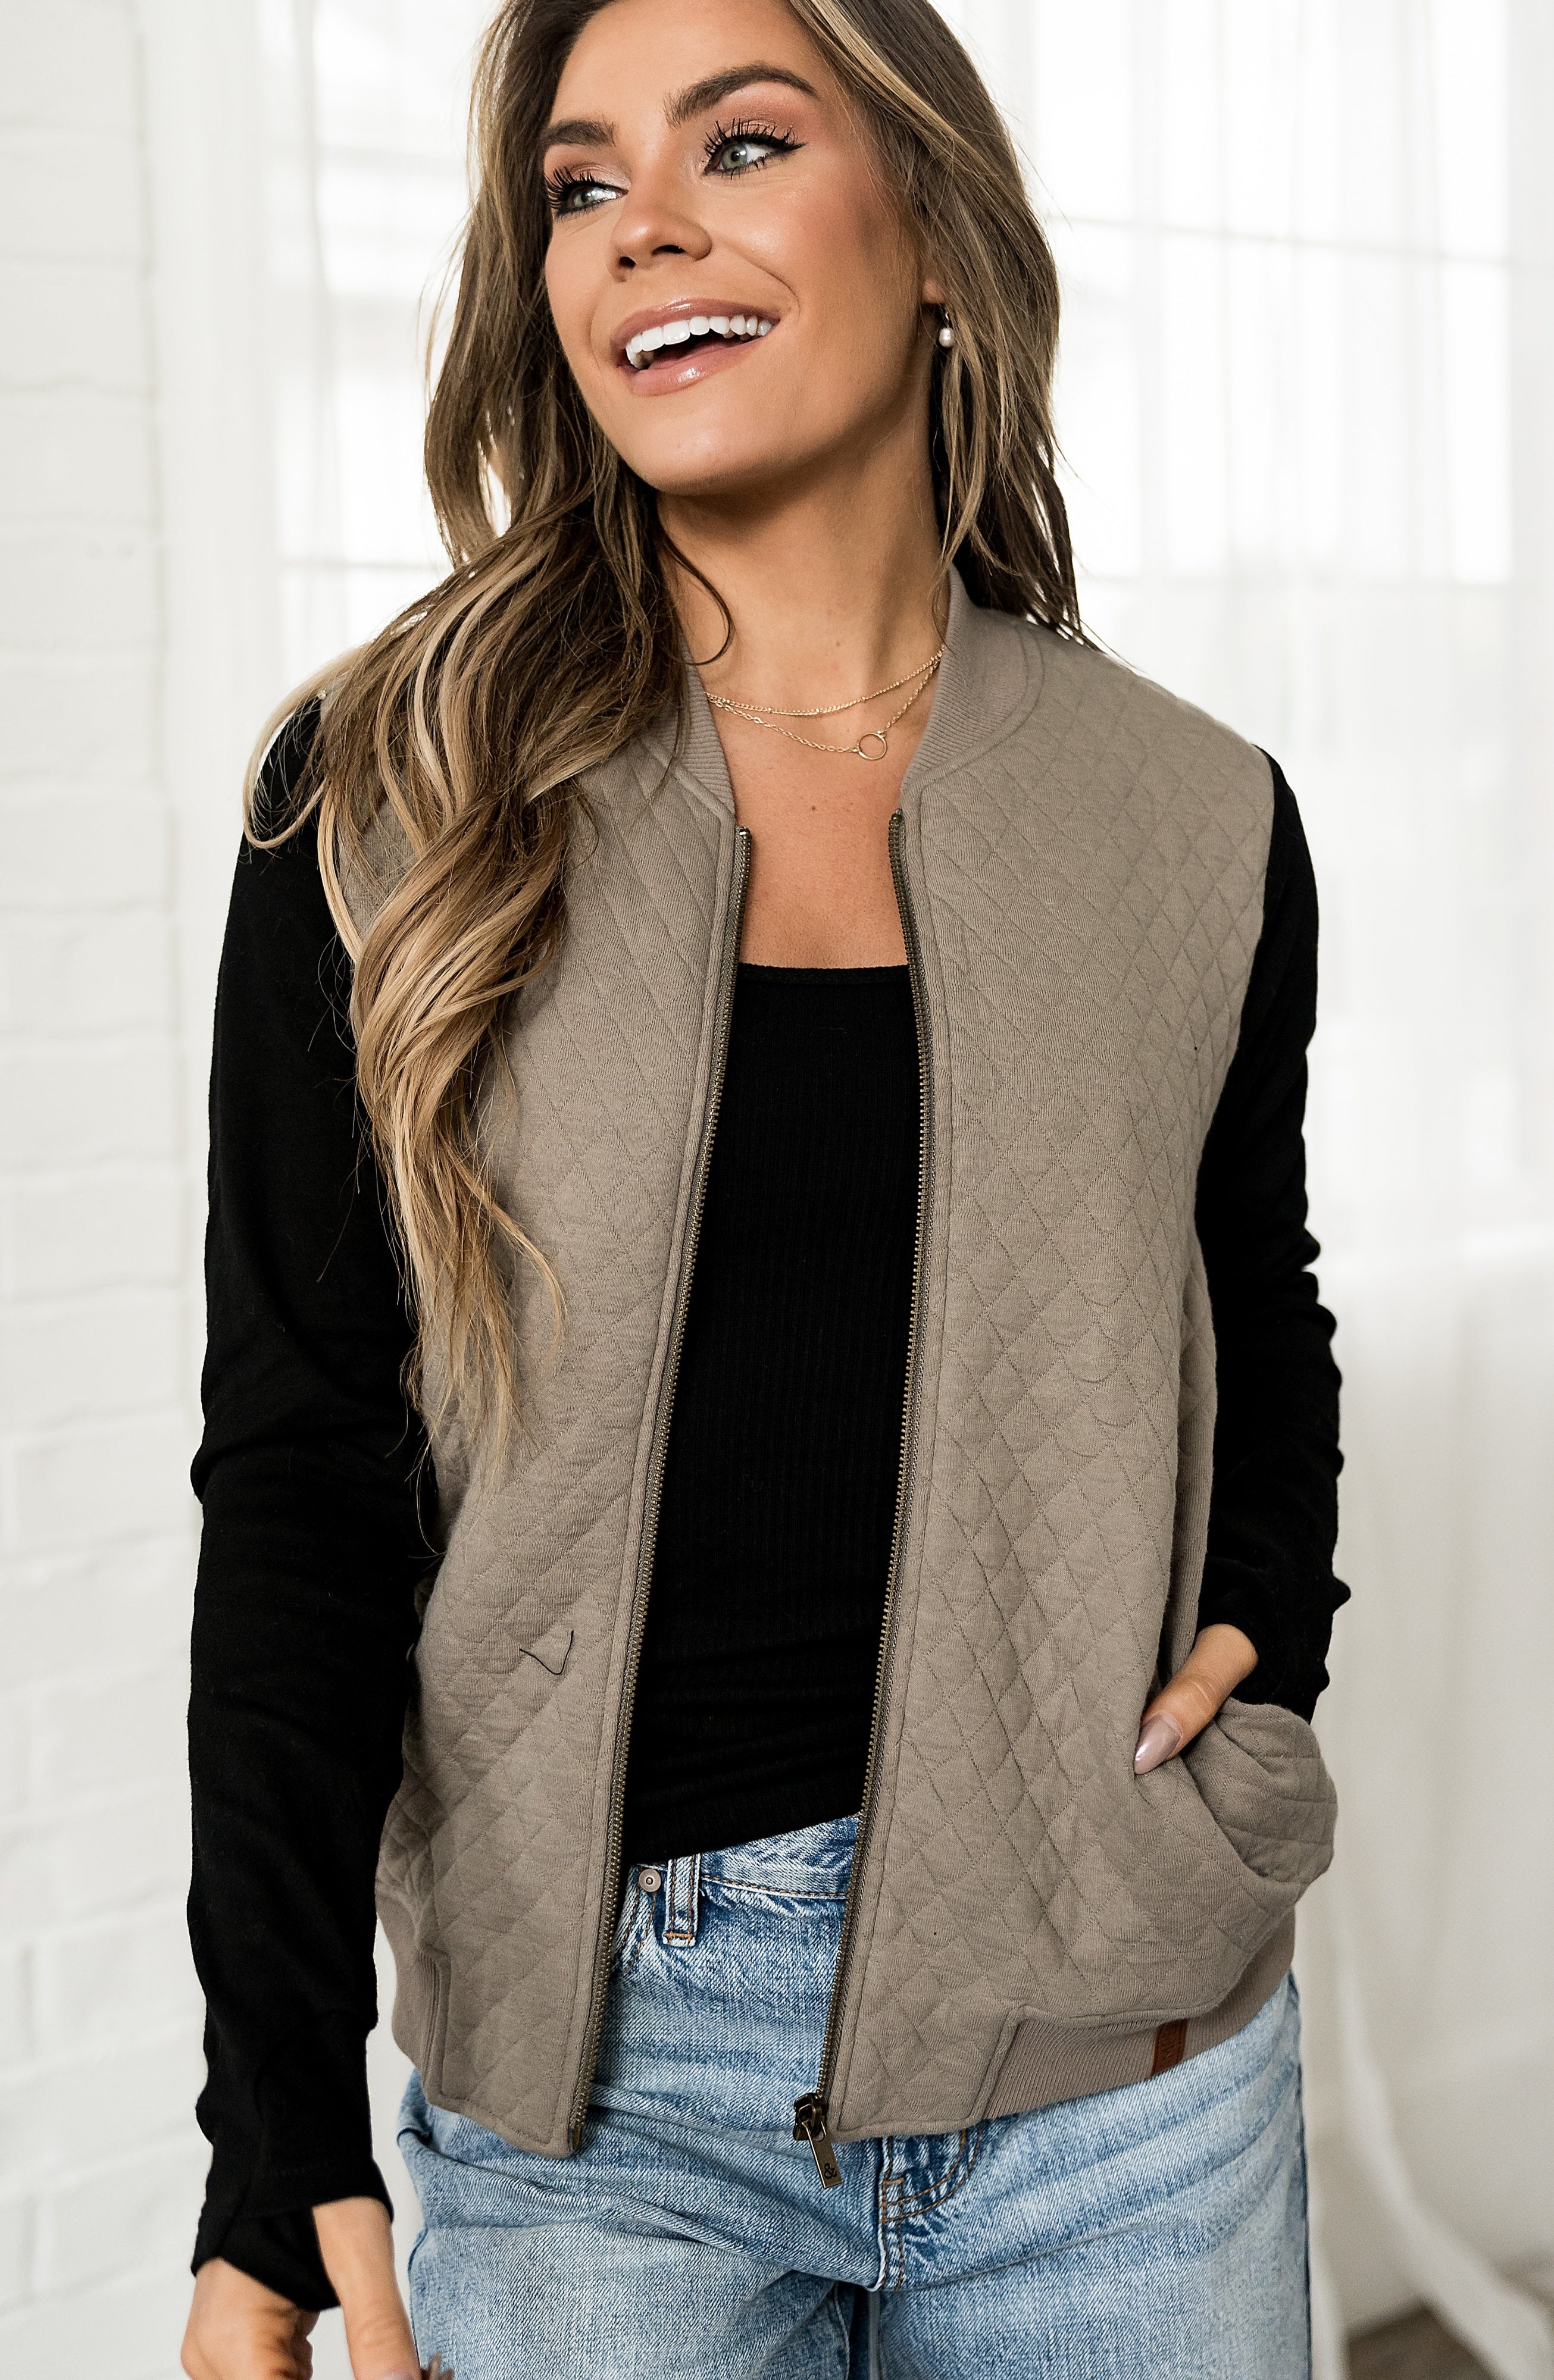 Ampersand Avenue Quilted Bomber Jacket - Black & Taupe